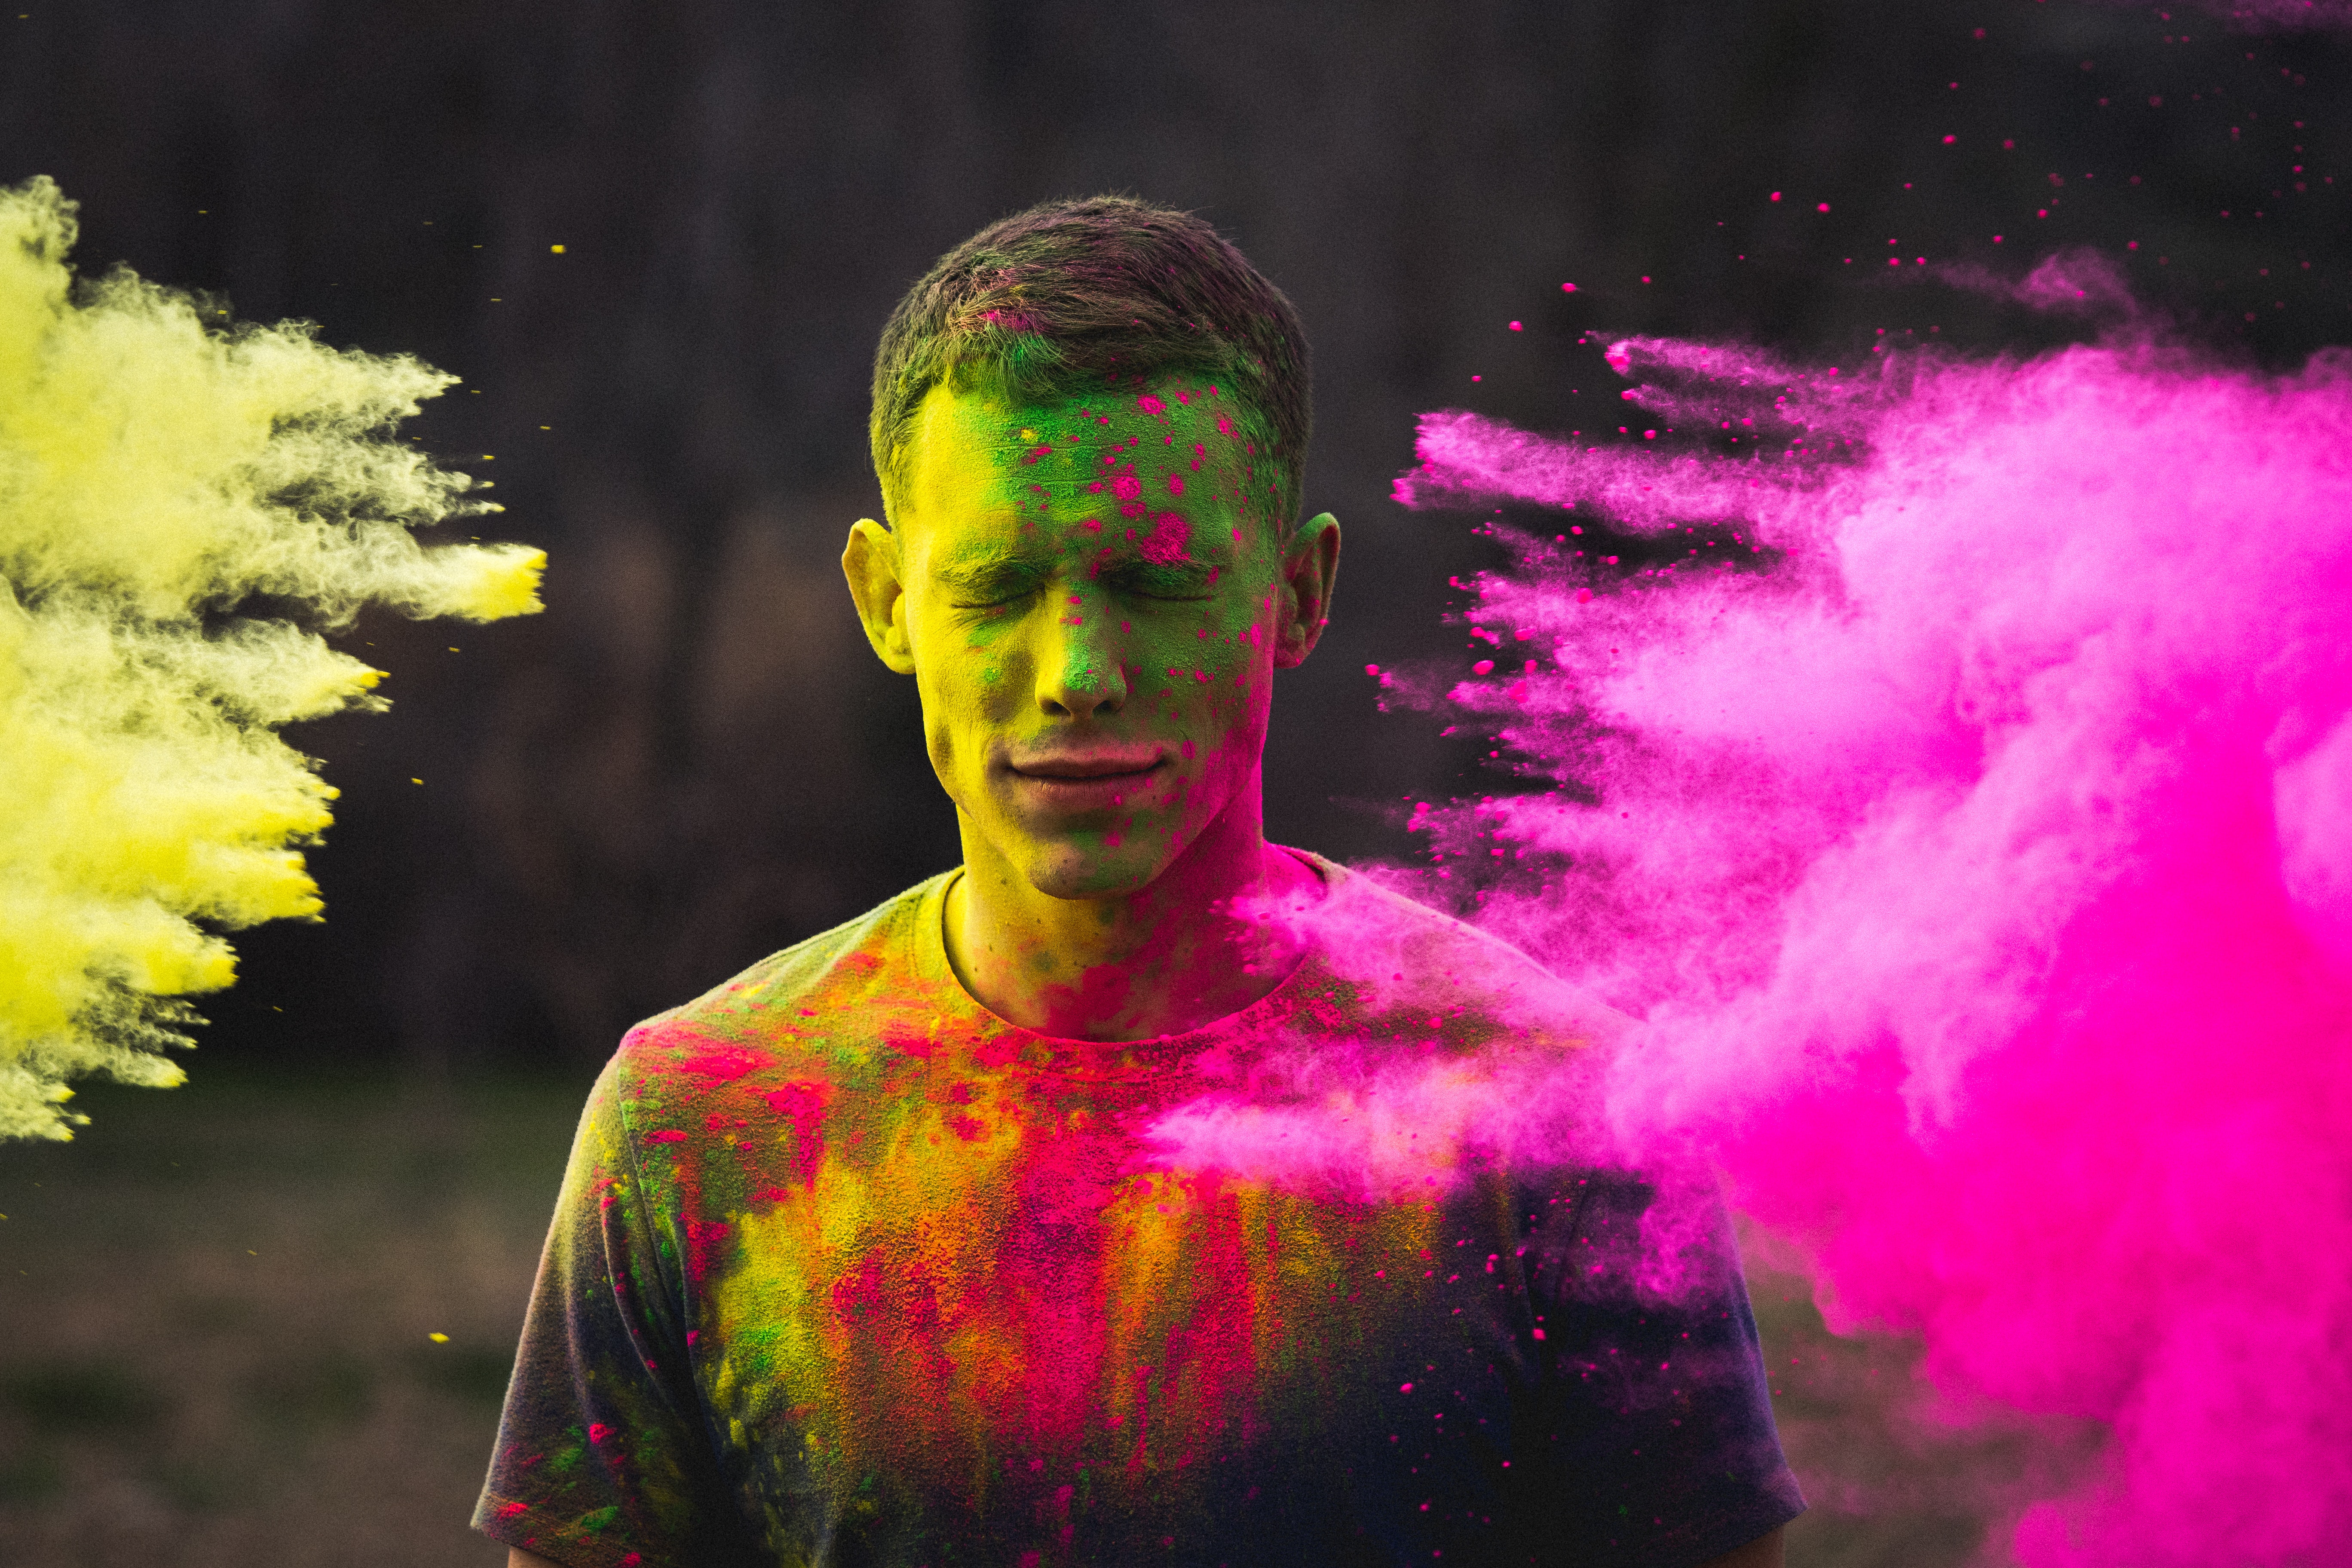 A man with his eyes closed being splashed with paint. A pink paint cloud appears on the right.